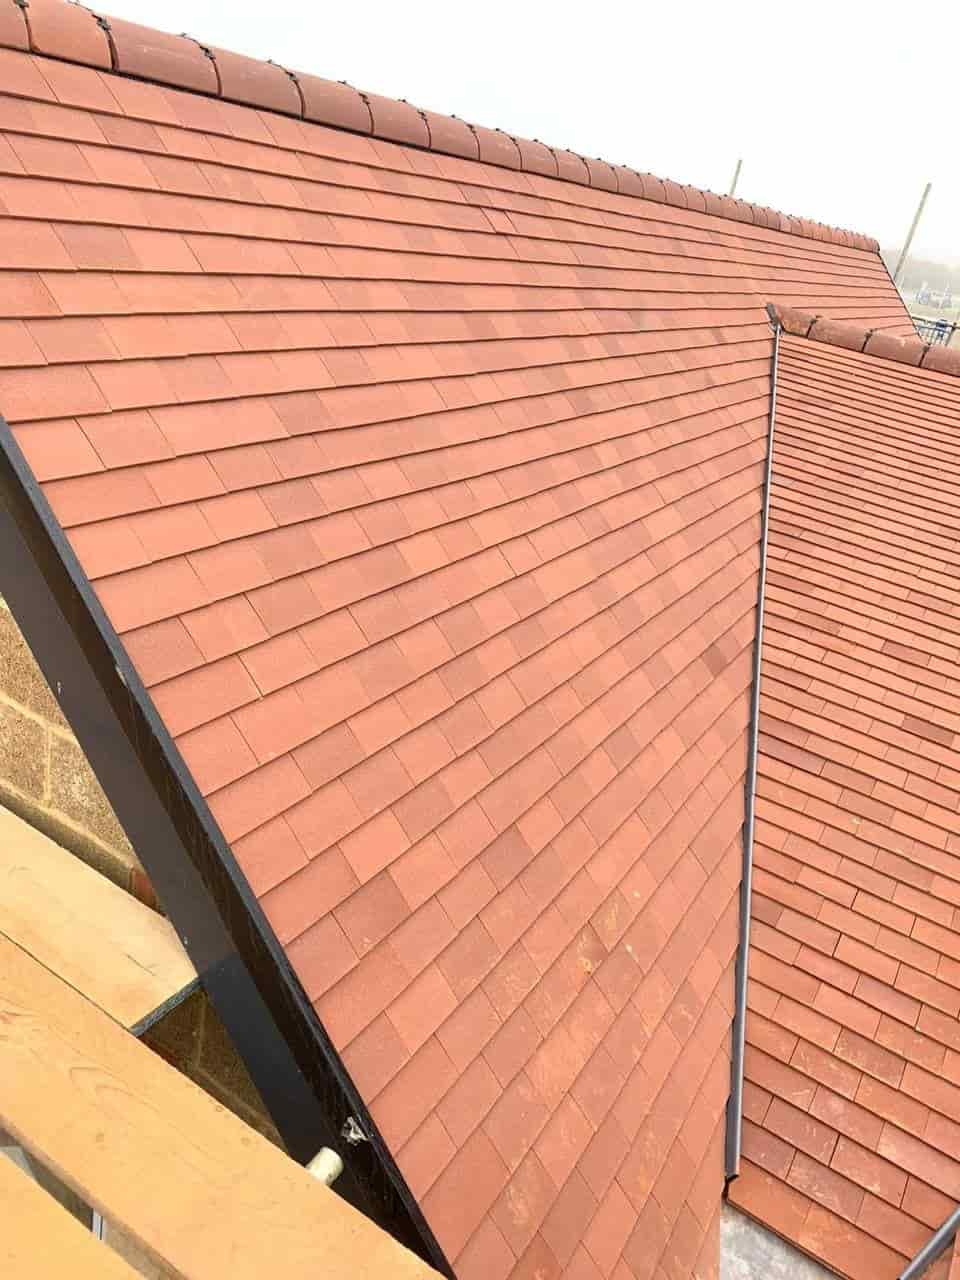 This is a photo of a new roof installation in Rye, East Sussex. Works carried out by Rye Roofers